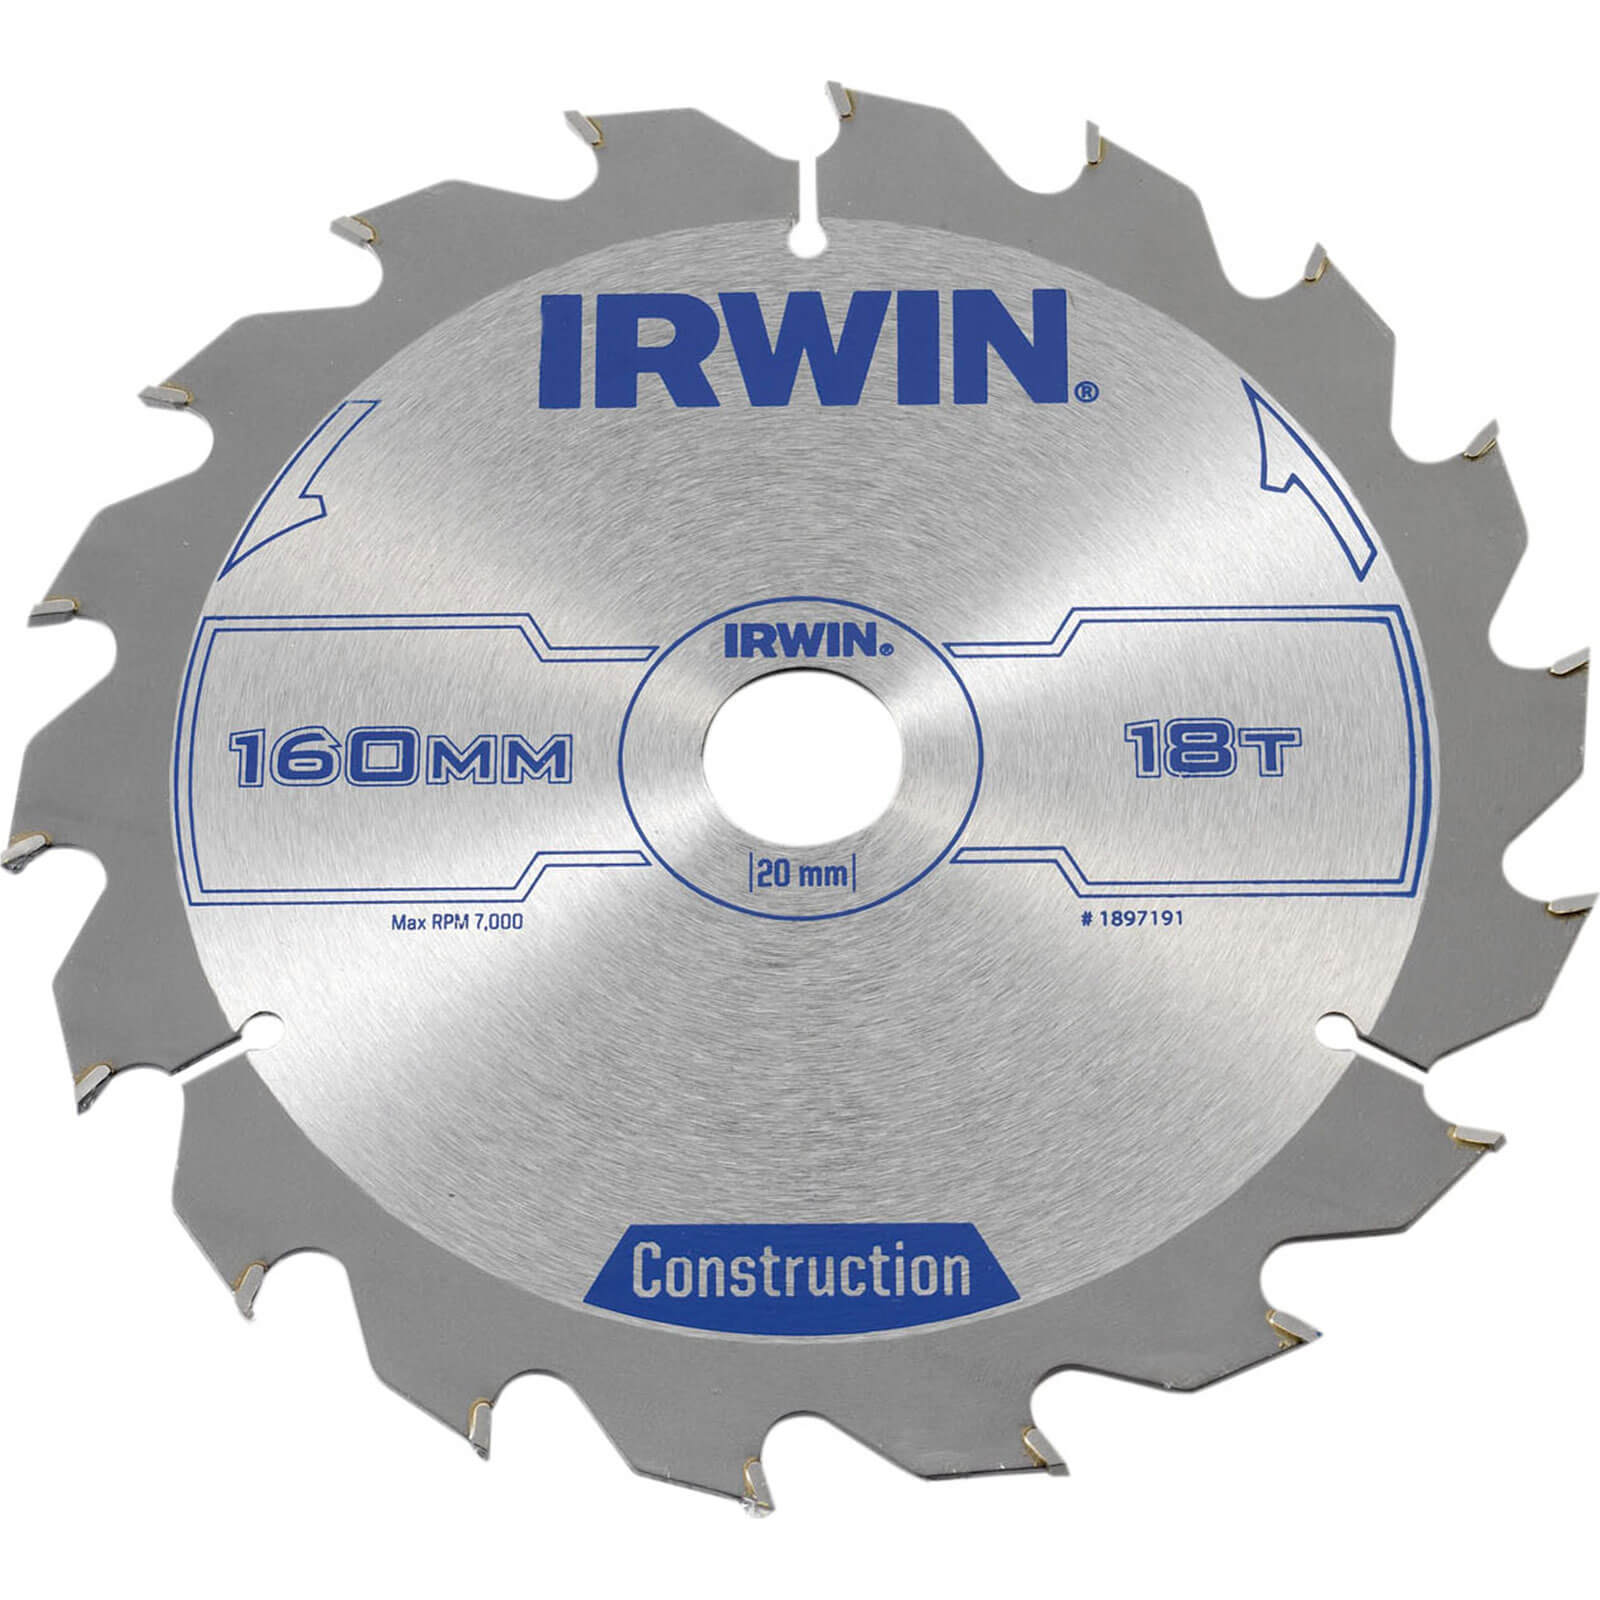 Photo of Irwin Atb Construction Circular Saw Blade 160mm 18t 20mm